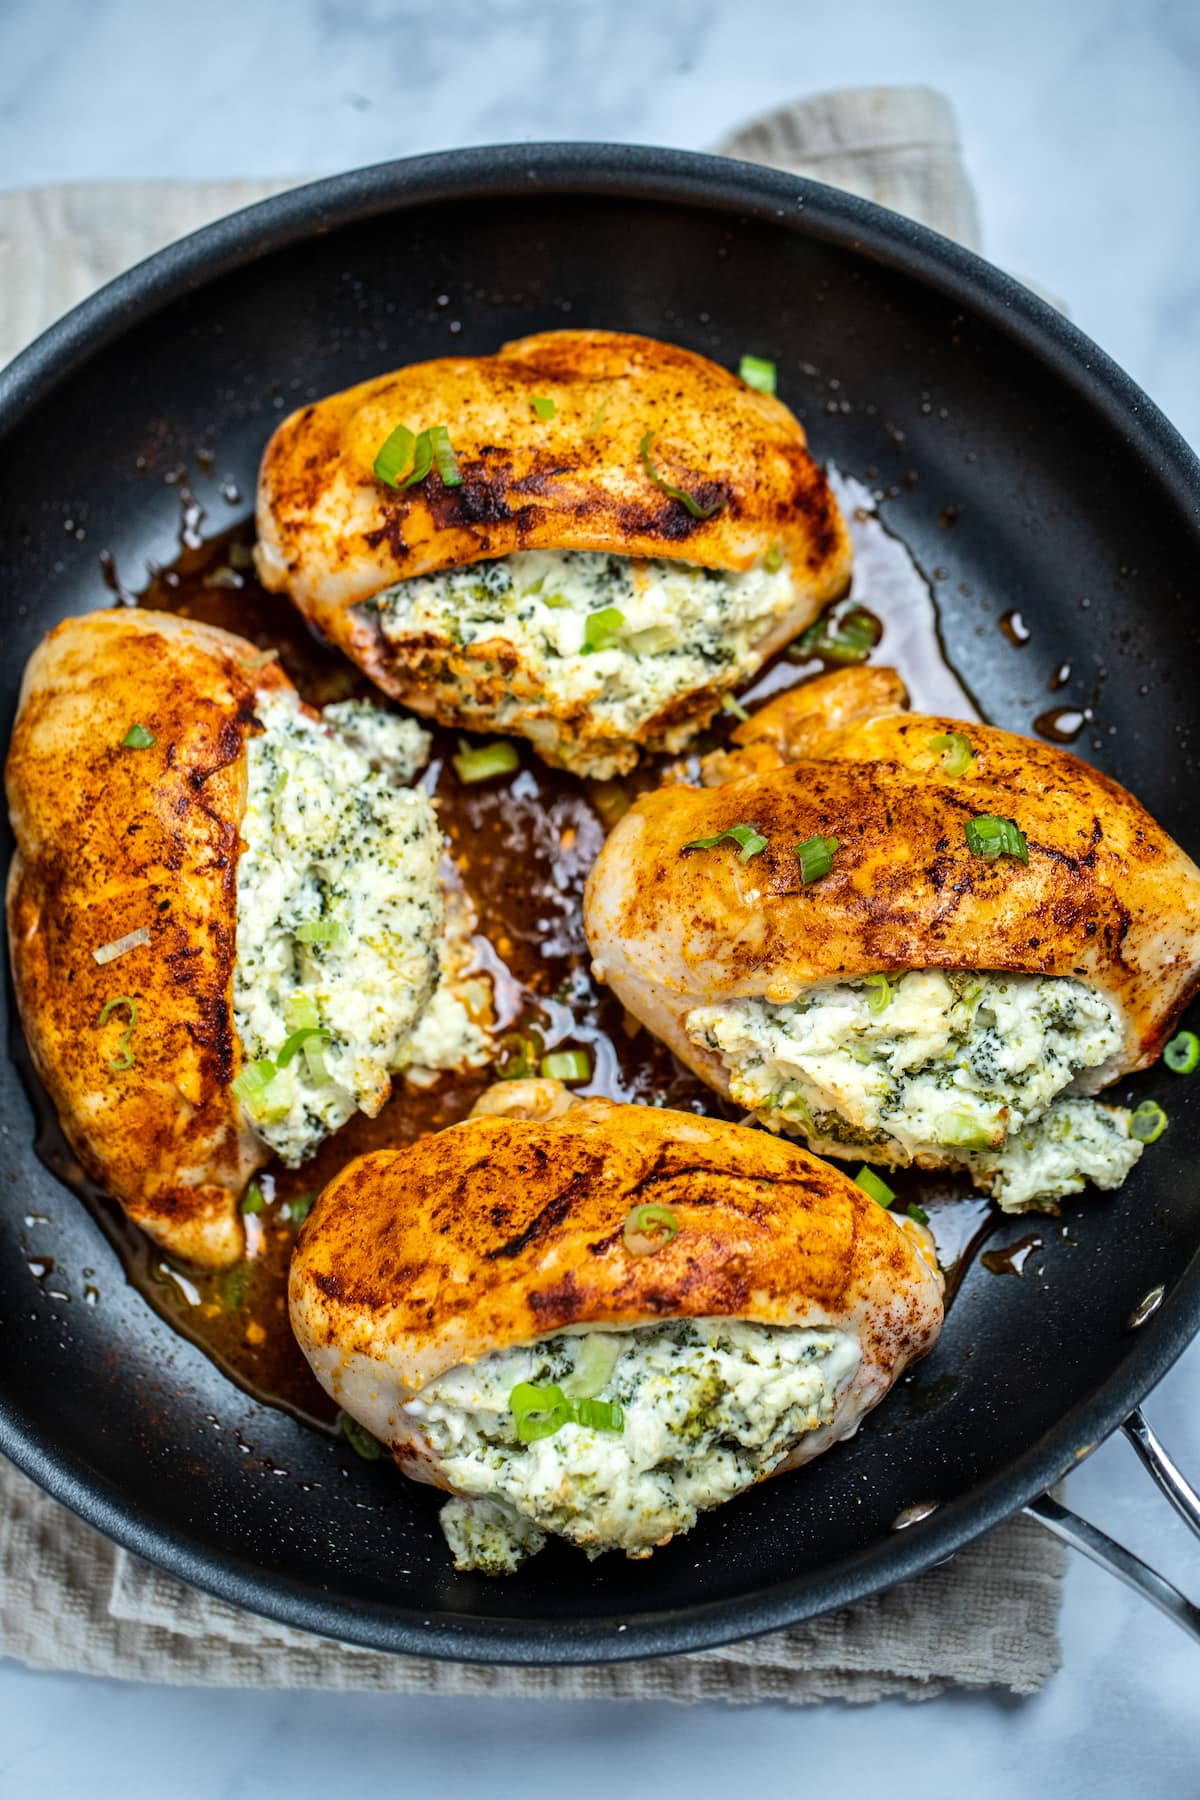 Finished broccoli and cheese stuffed chicken breasts in a nonstick skillet.